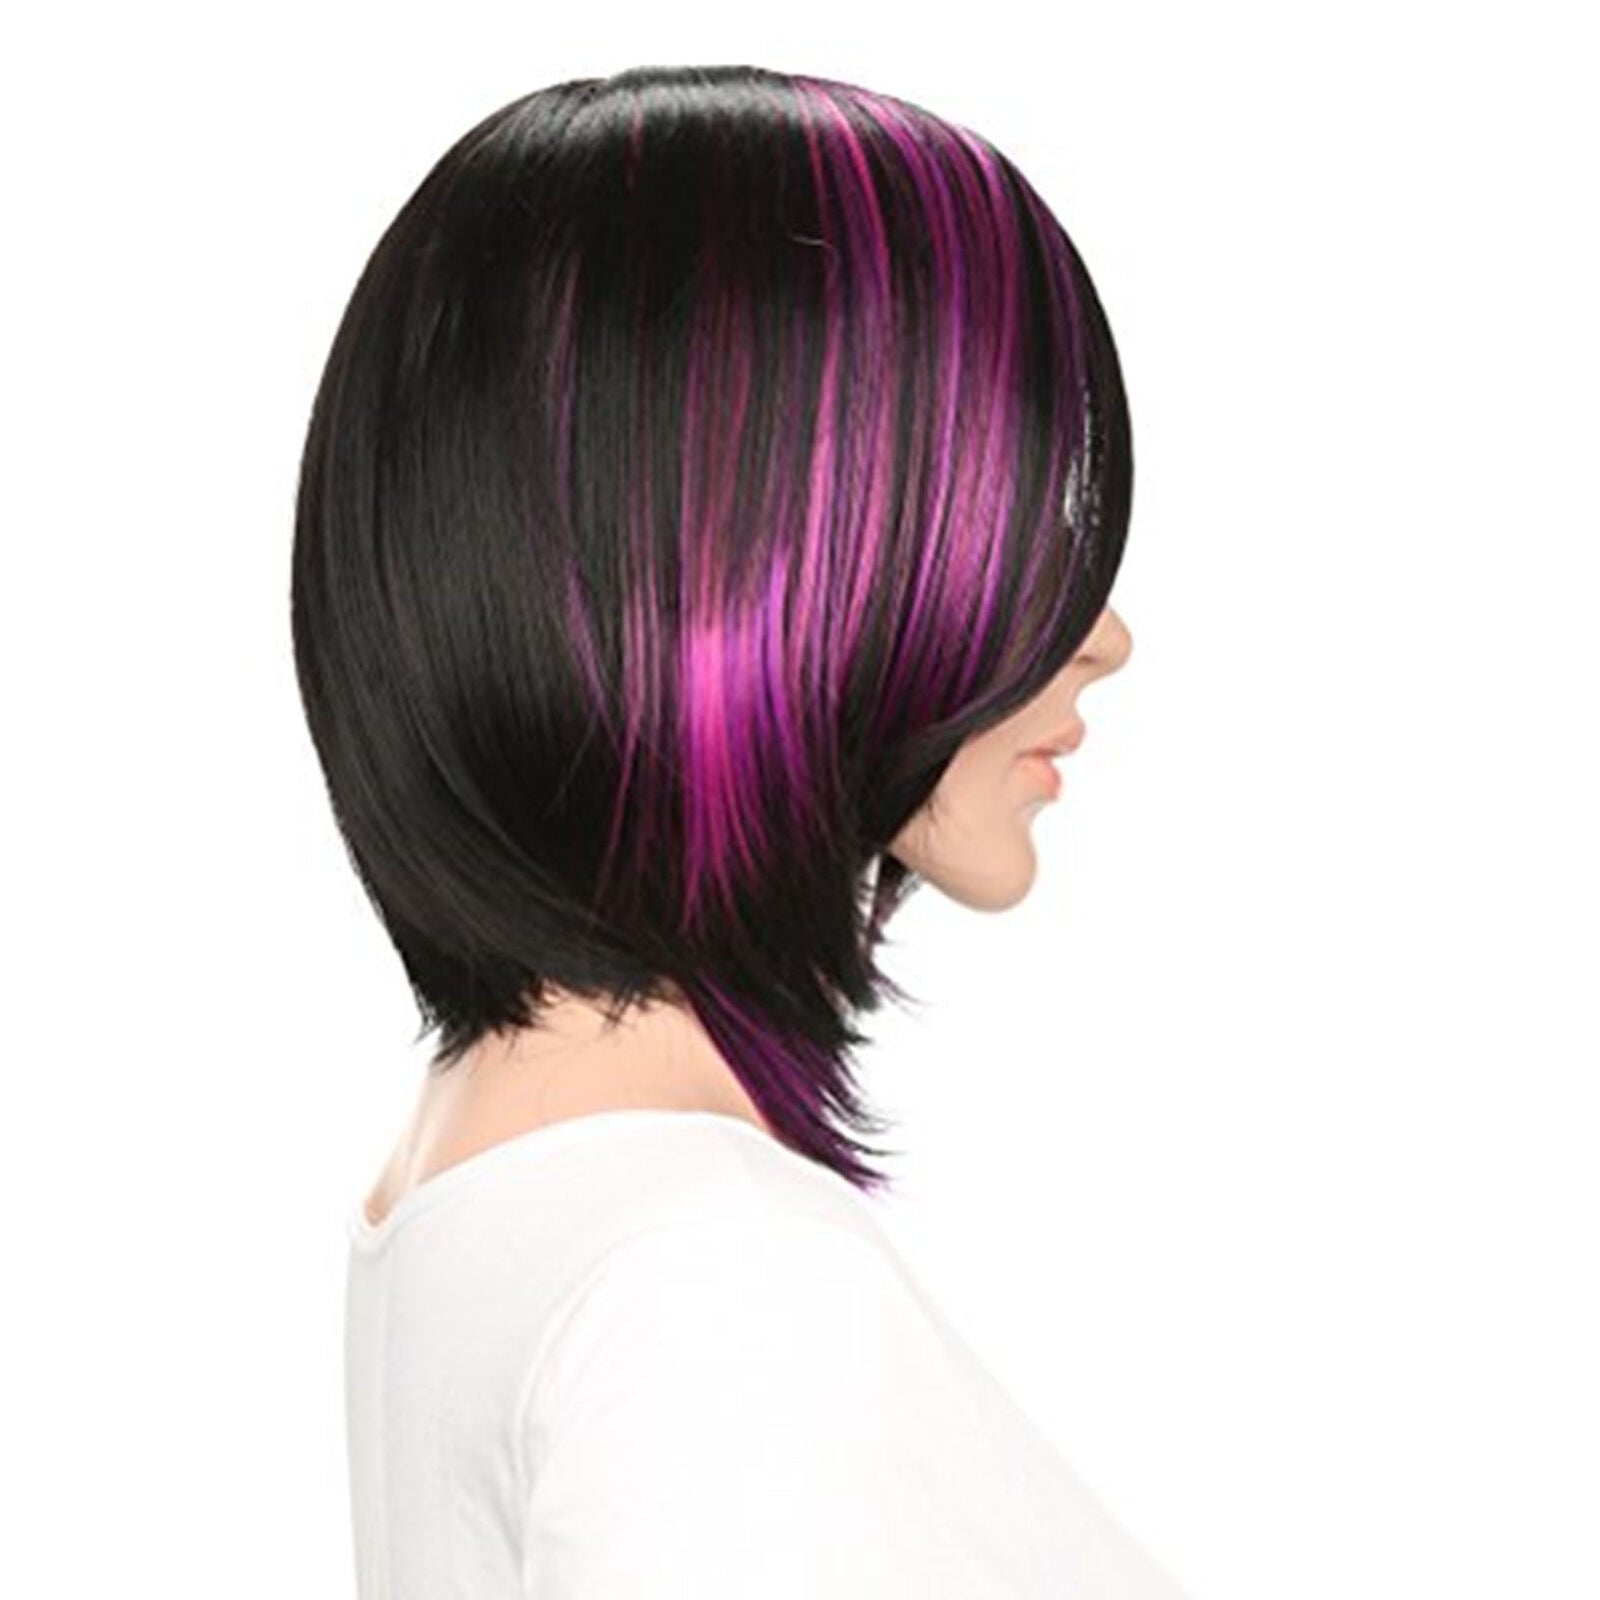 Short Straight Bob Wig Mix Color Highlight Purple Wigs with Side Bangs Wig